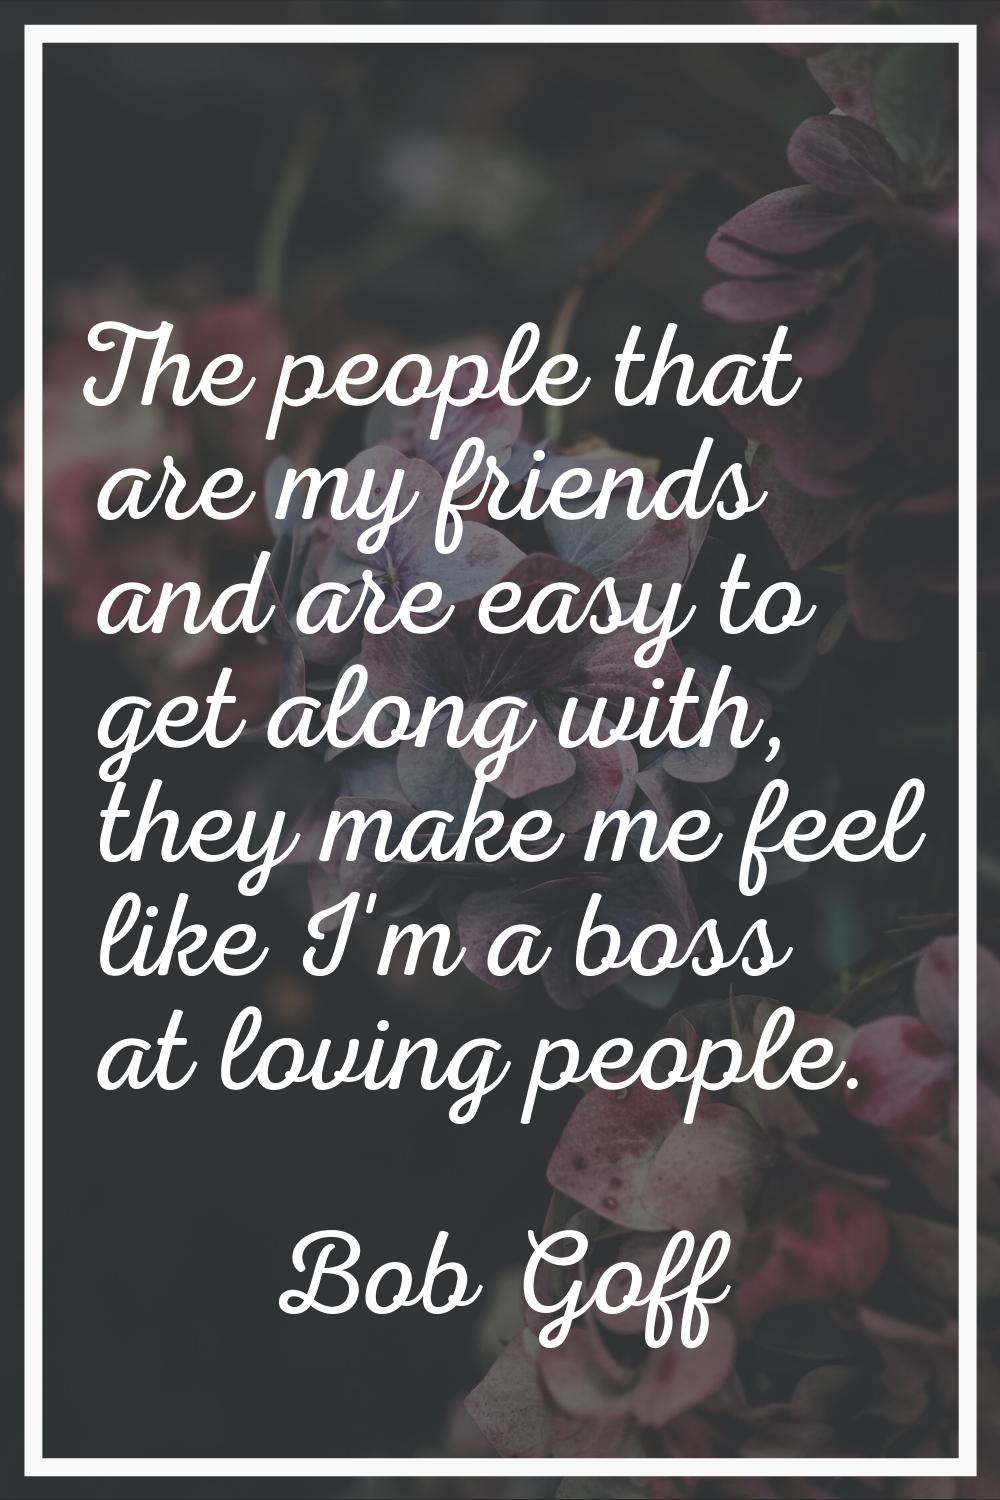 The people that are my friends and are easy to get along with, they make me feel like I'm a boss at